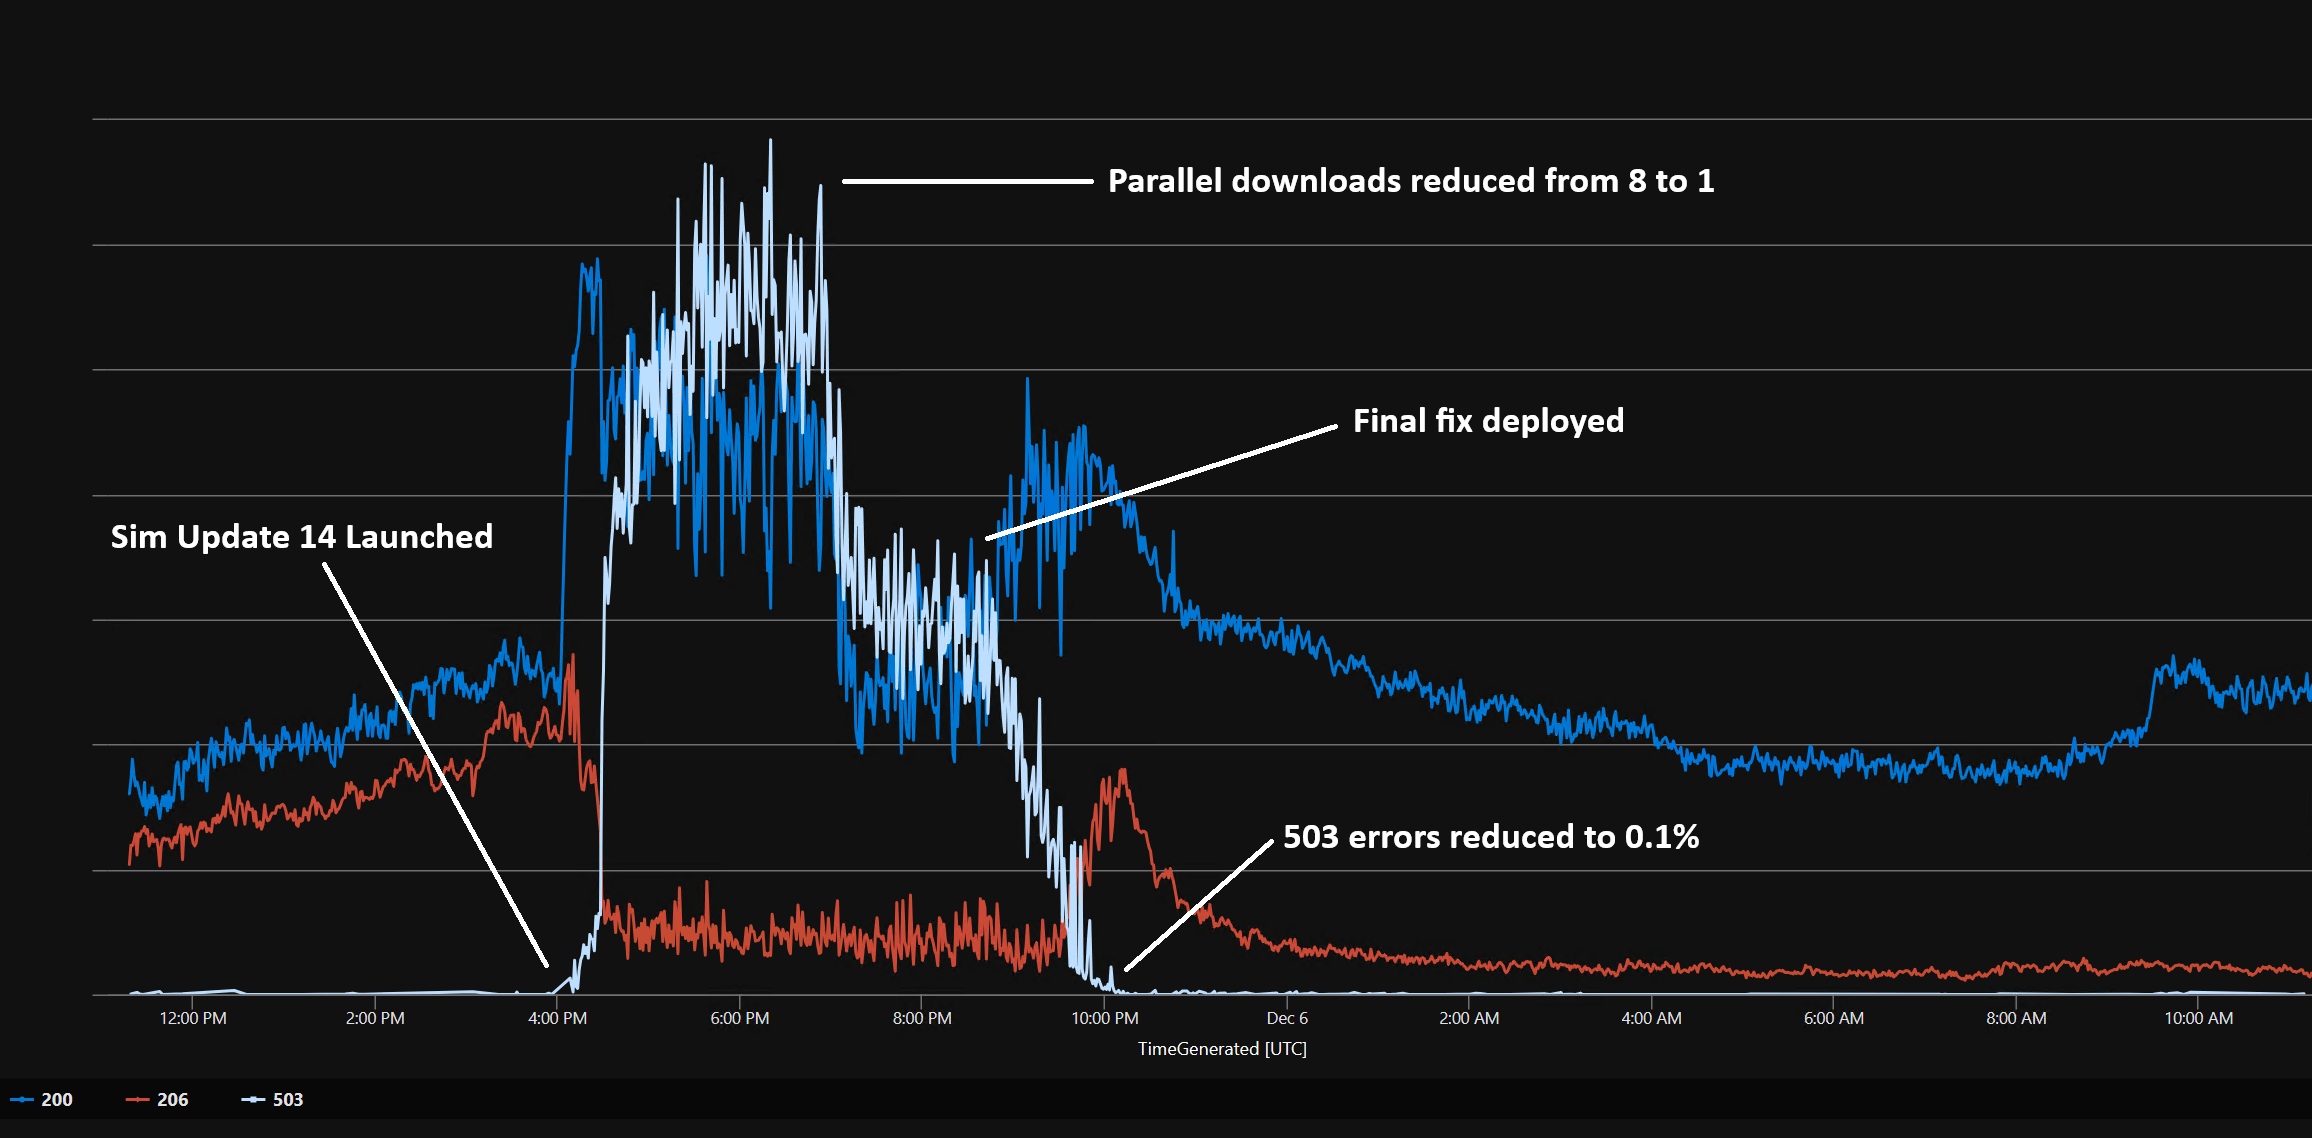 A graph showing the timeline of 503 errors during the Sim Update 14 deployment incident